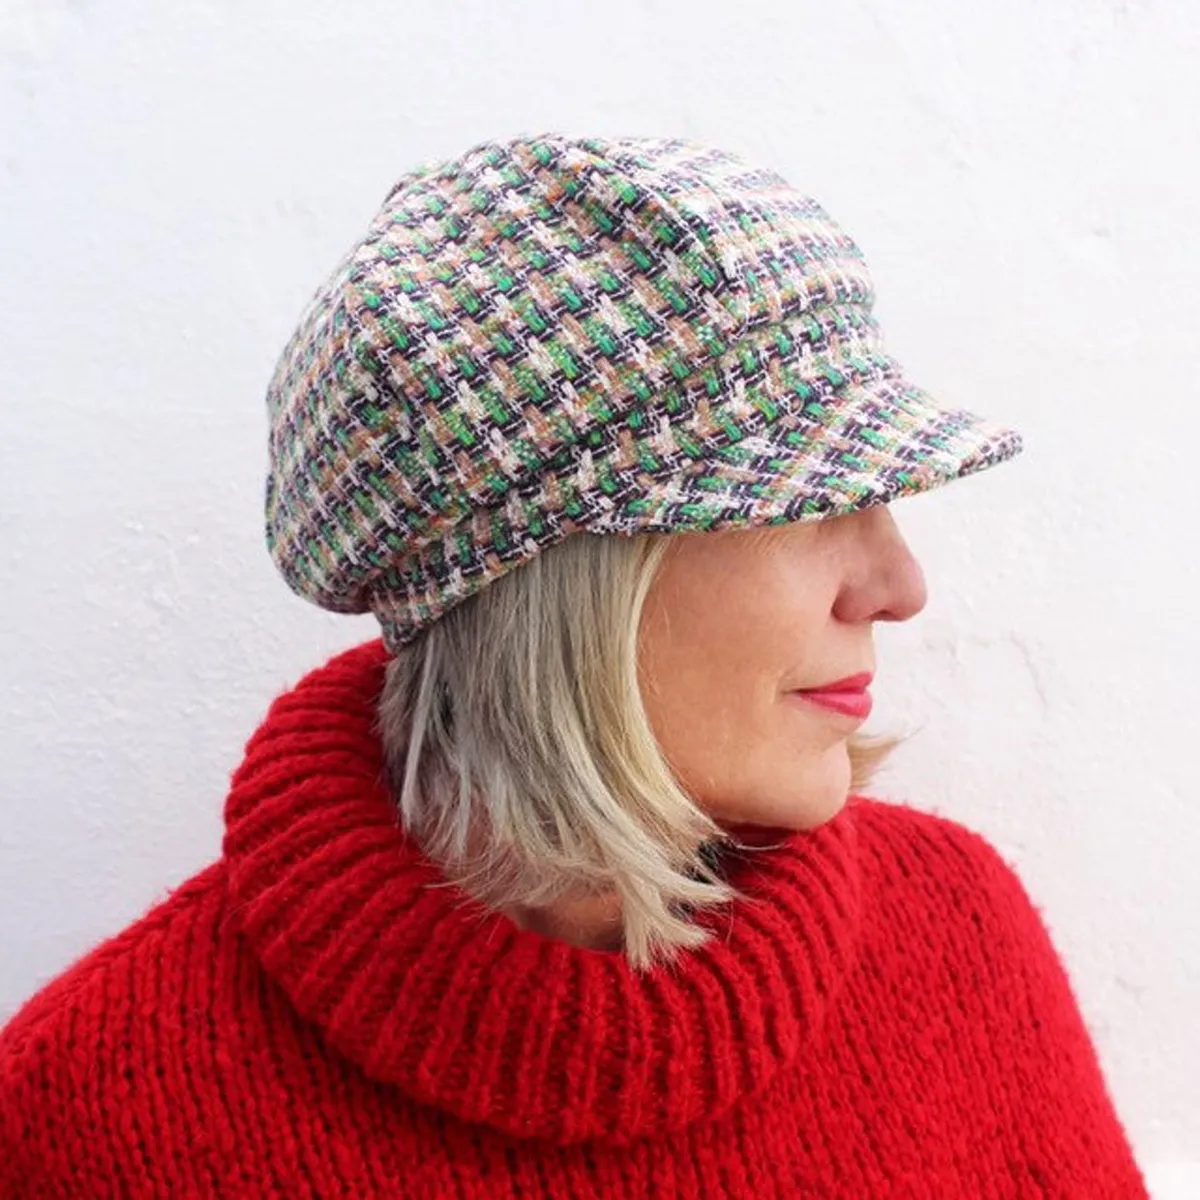 Hat sewing patterns – Chelsea hat